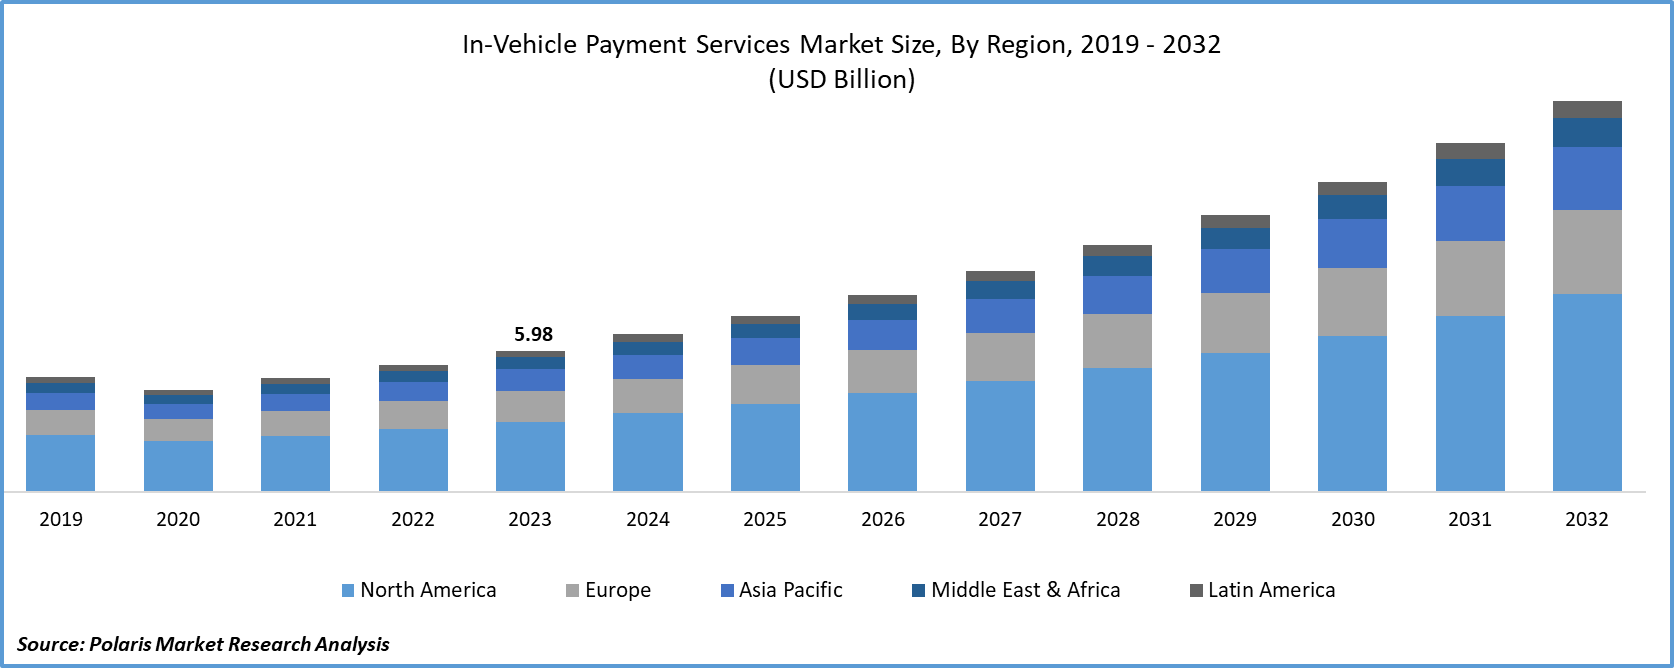 In-Vehicle Payment Services Market Size